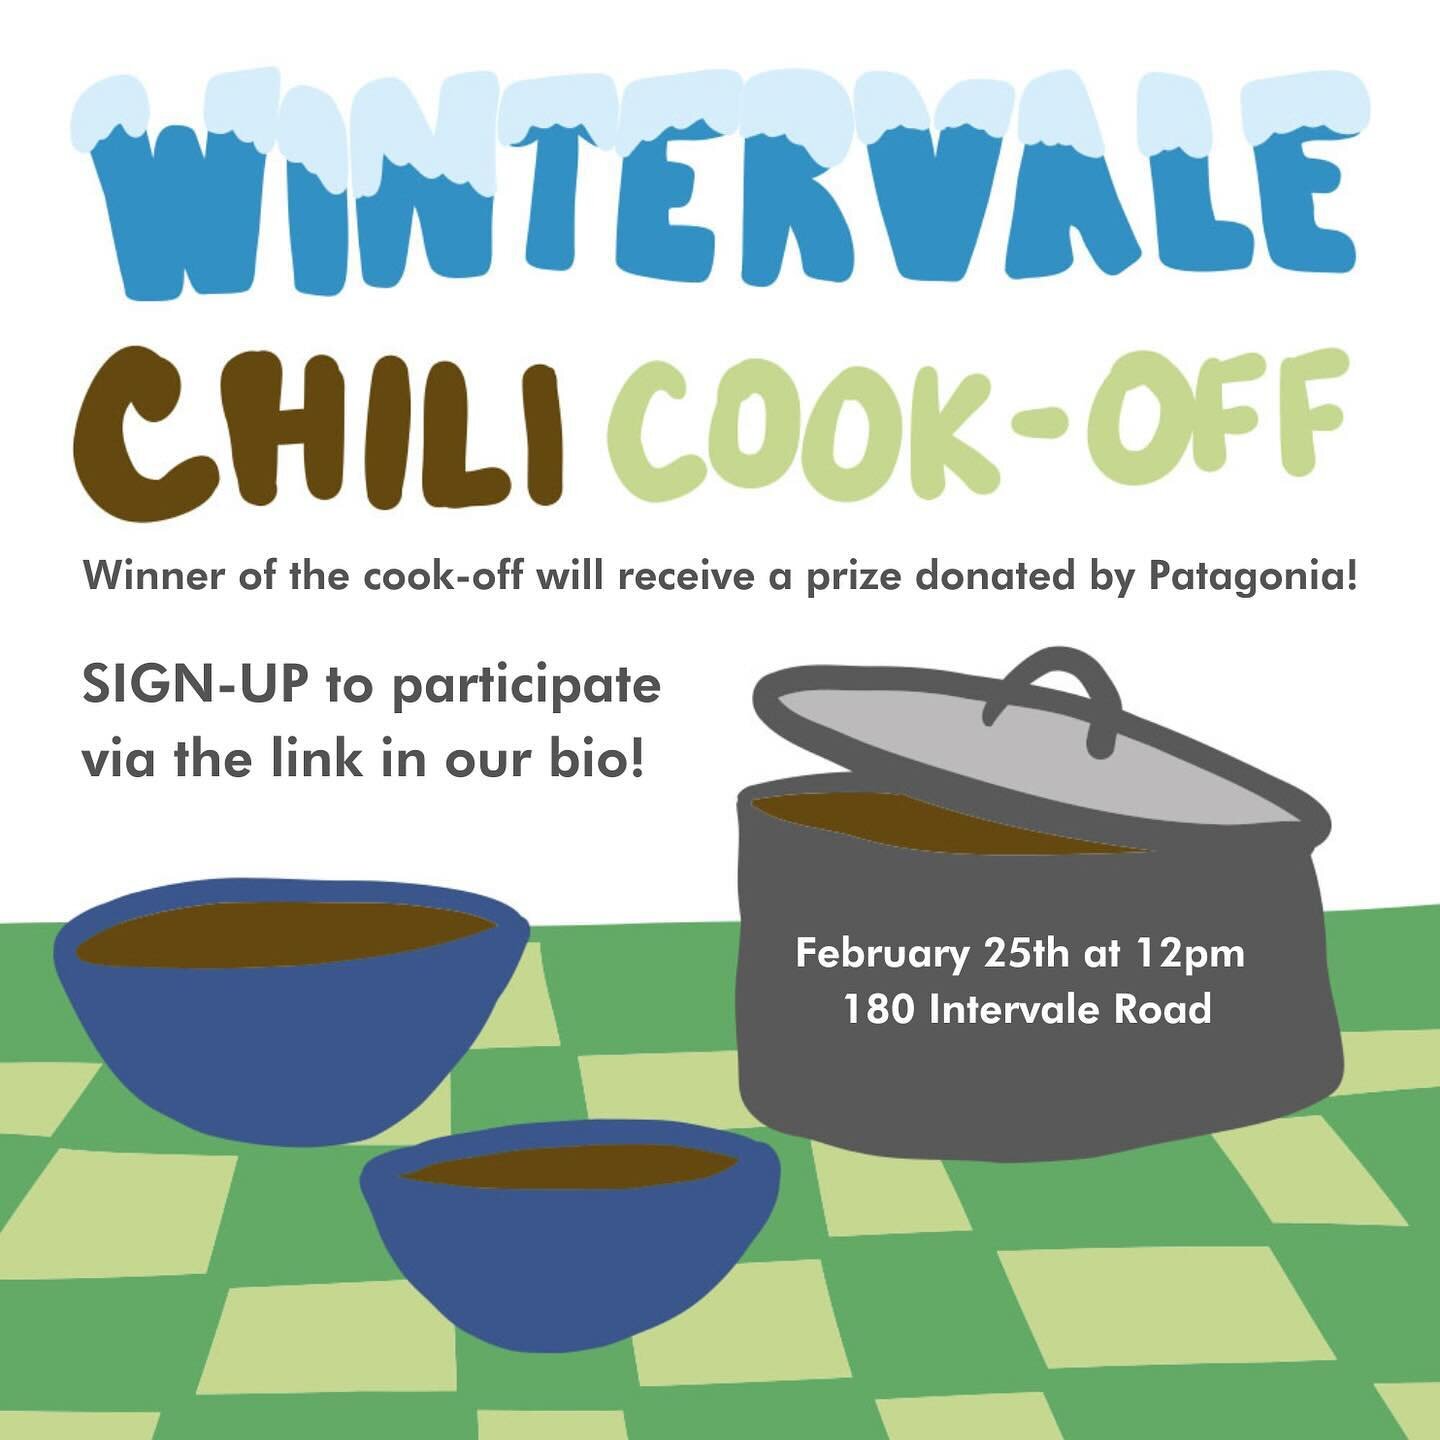 Do you cook the best chili? We are having a chili cook-off at Wintervale this year! Visit the link in our bio to learn more and sign-up to participate.